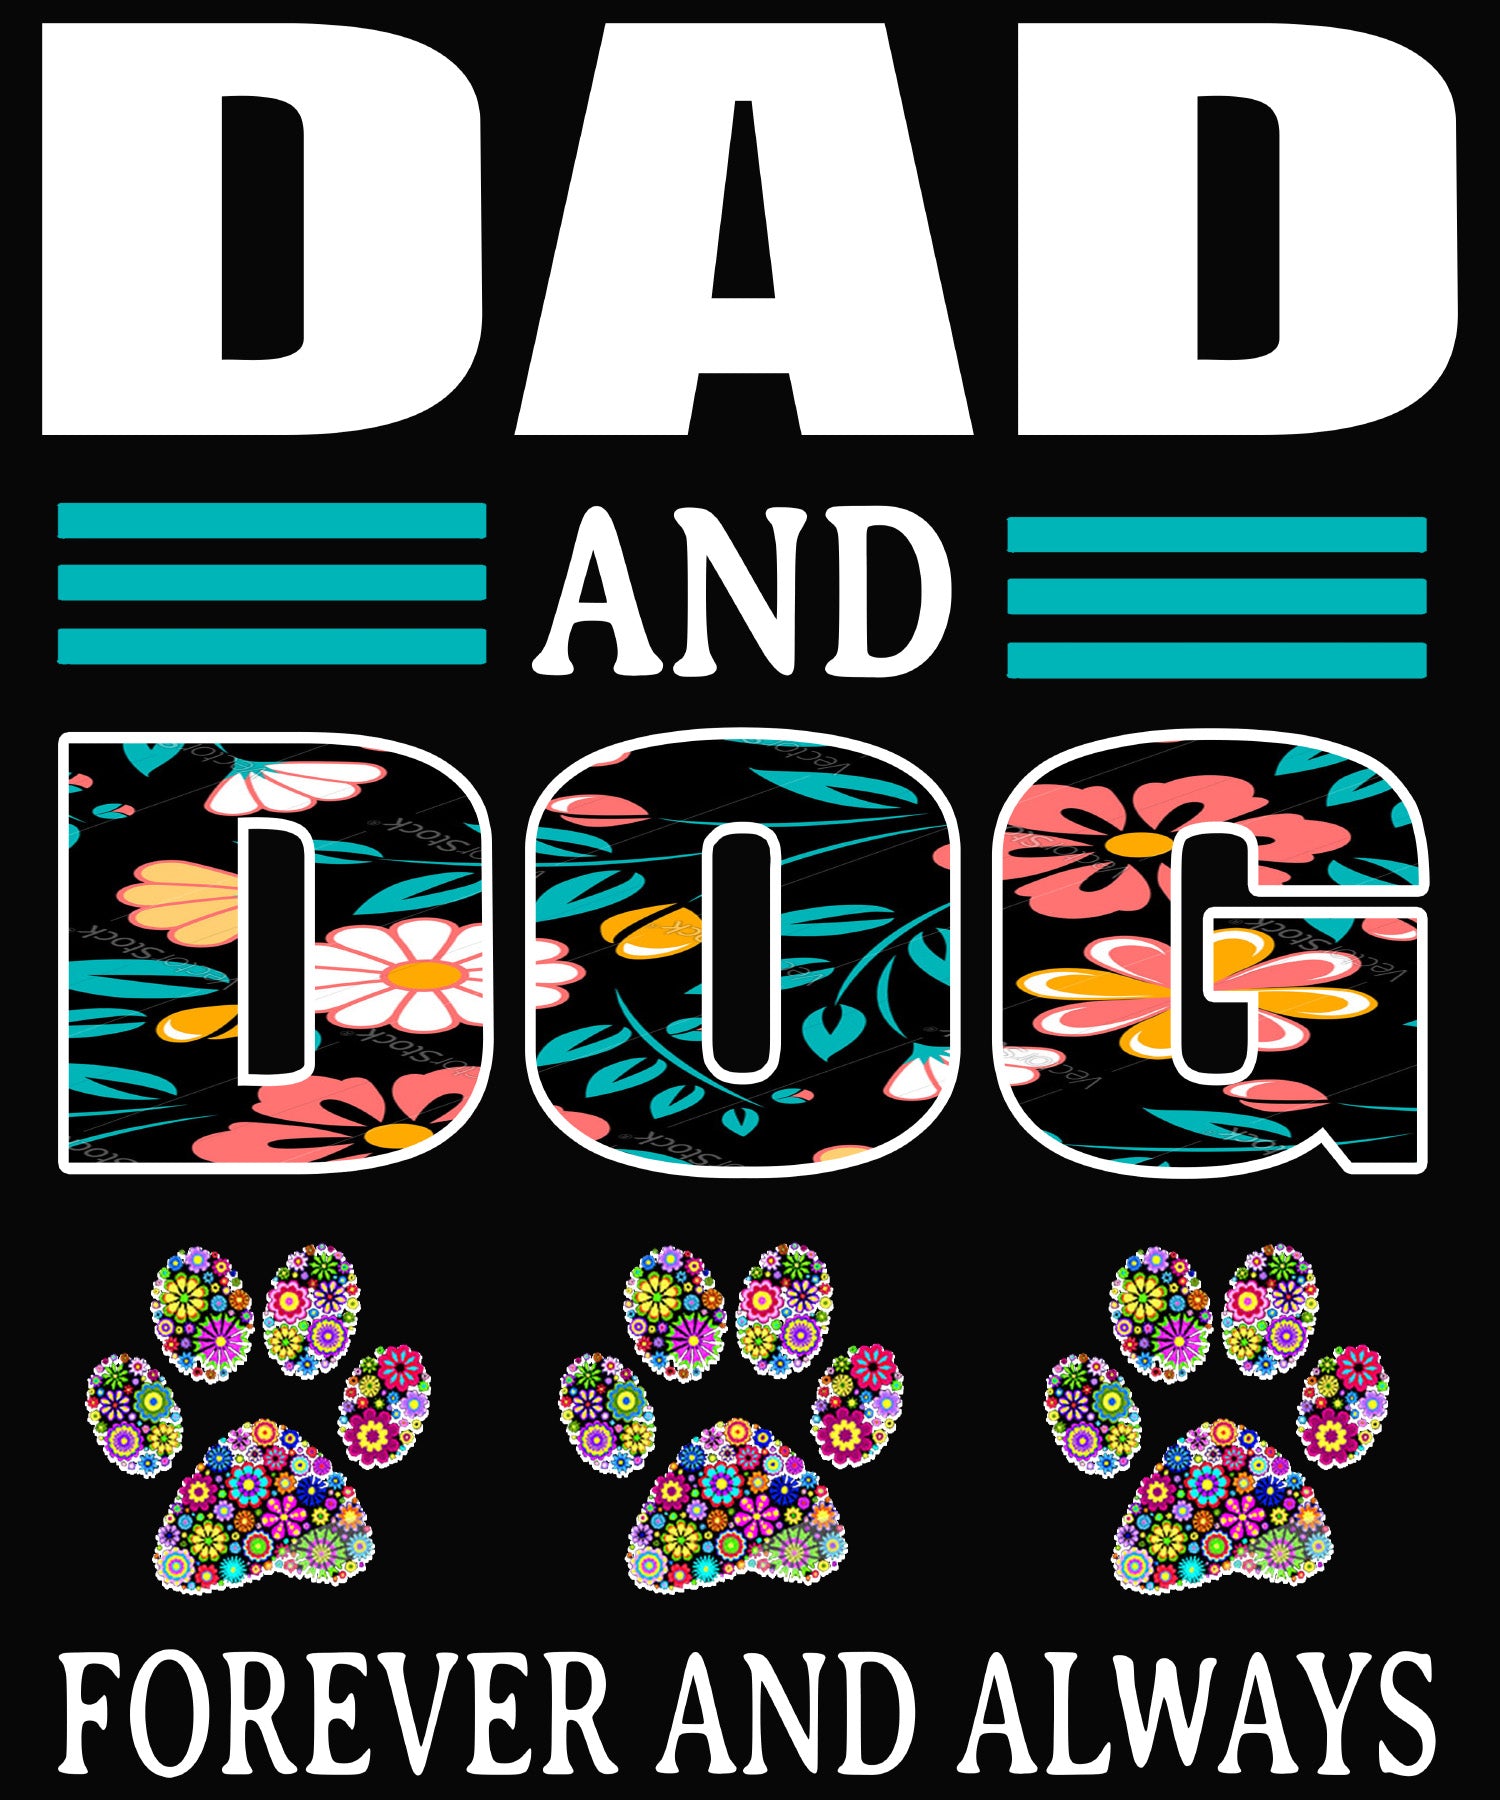 "DAD AND DOG FOREVER AND ALWAYS".